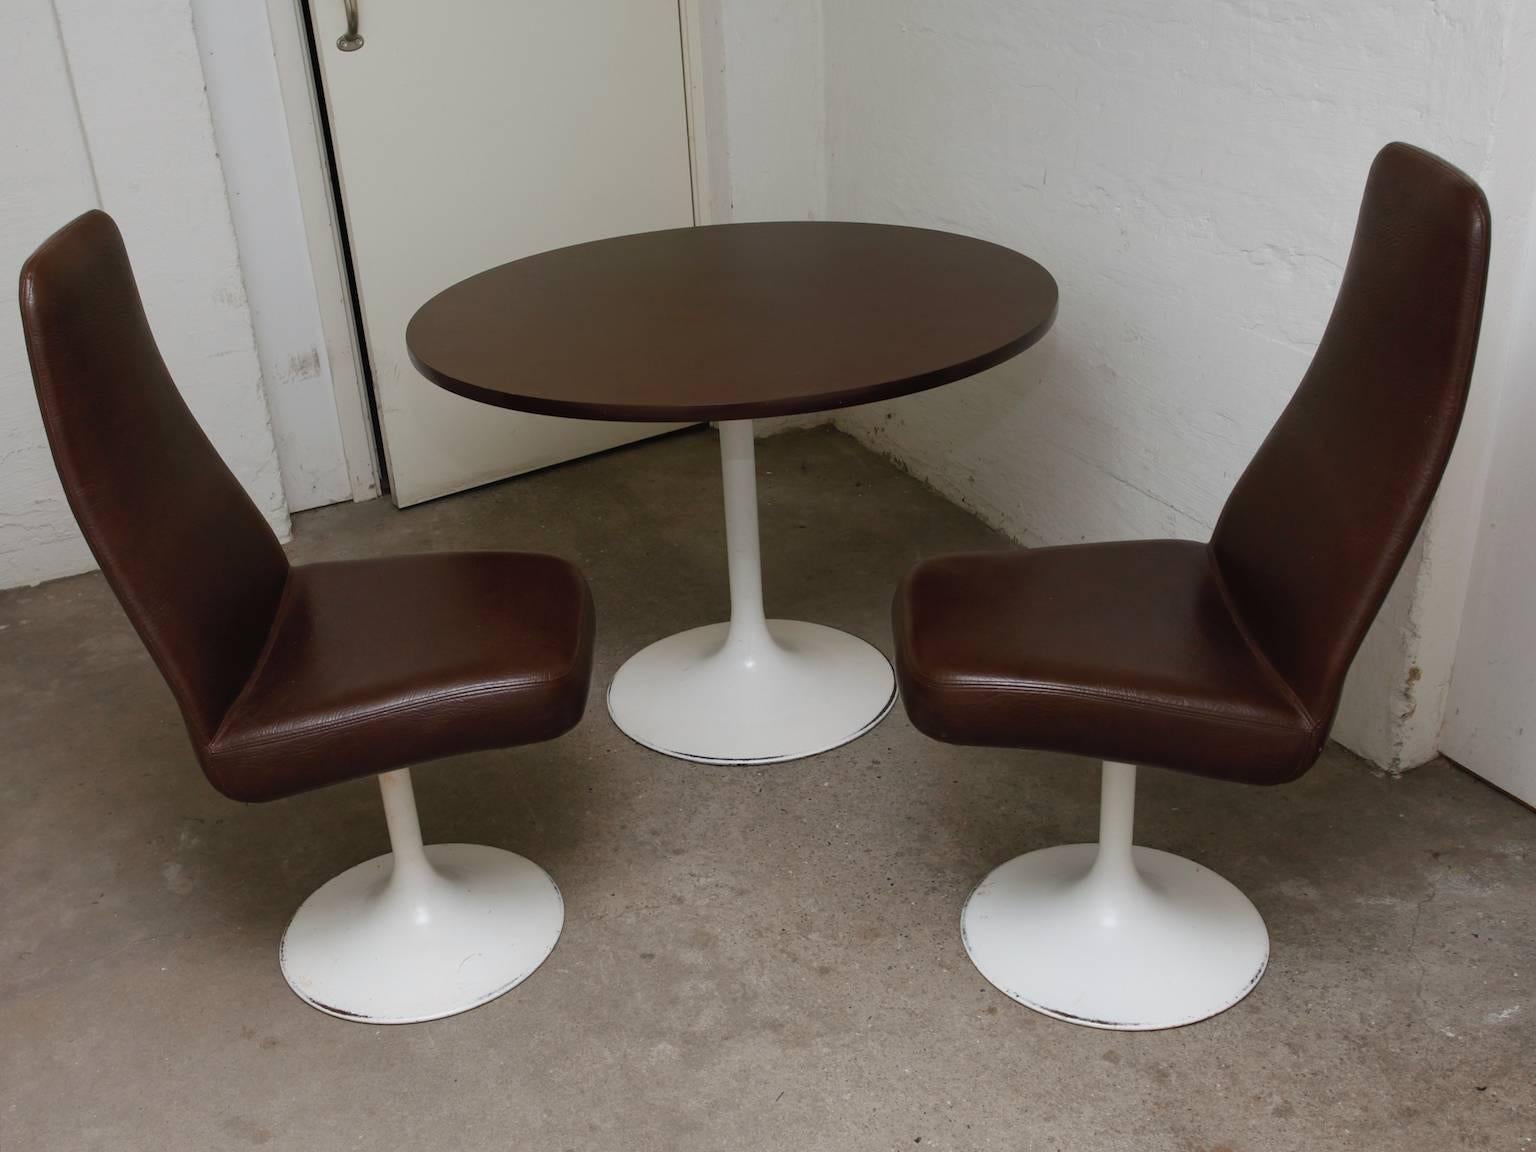 Scandinavian Modern Two Chairs with Matching Table and Tulip foot by Johanson Design, Sweden, 1970s For Sale